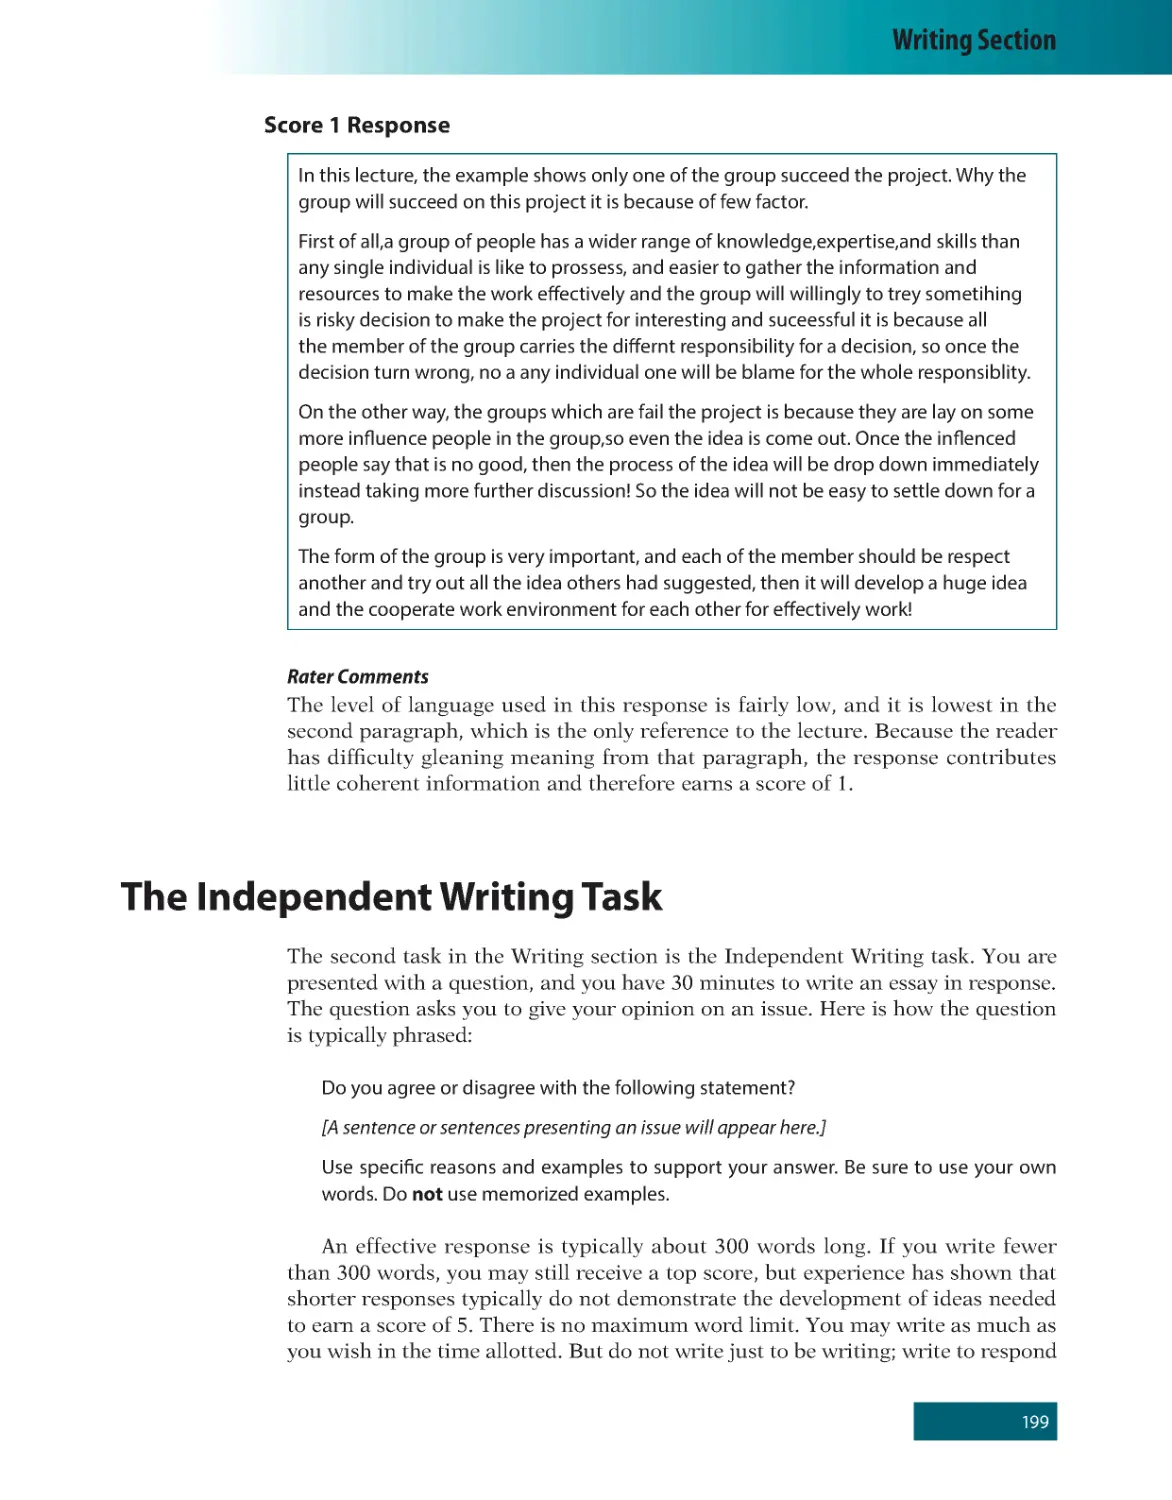 Score 1 Response
The Independent Writing Task